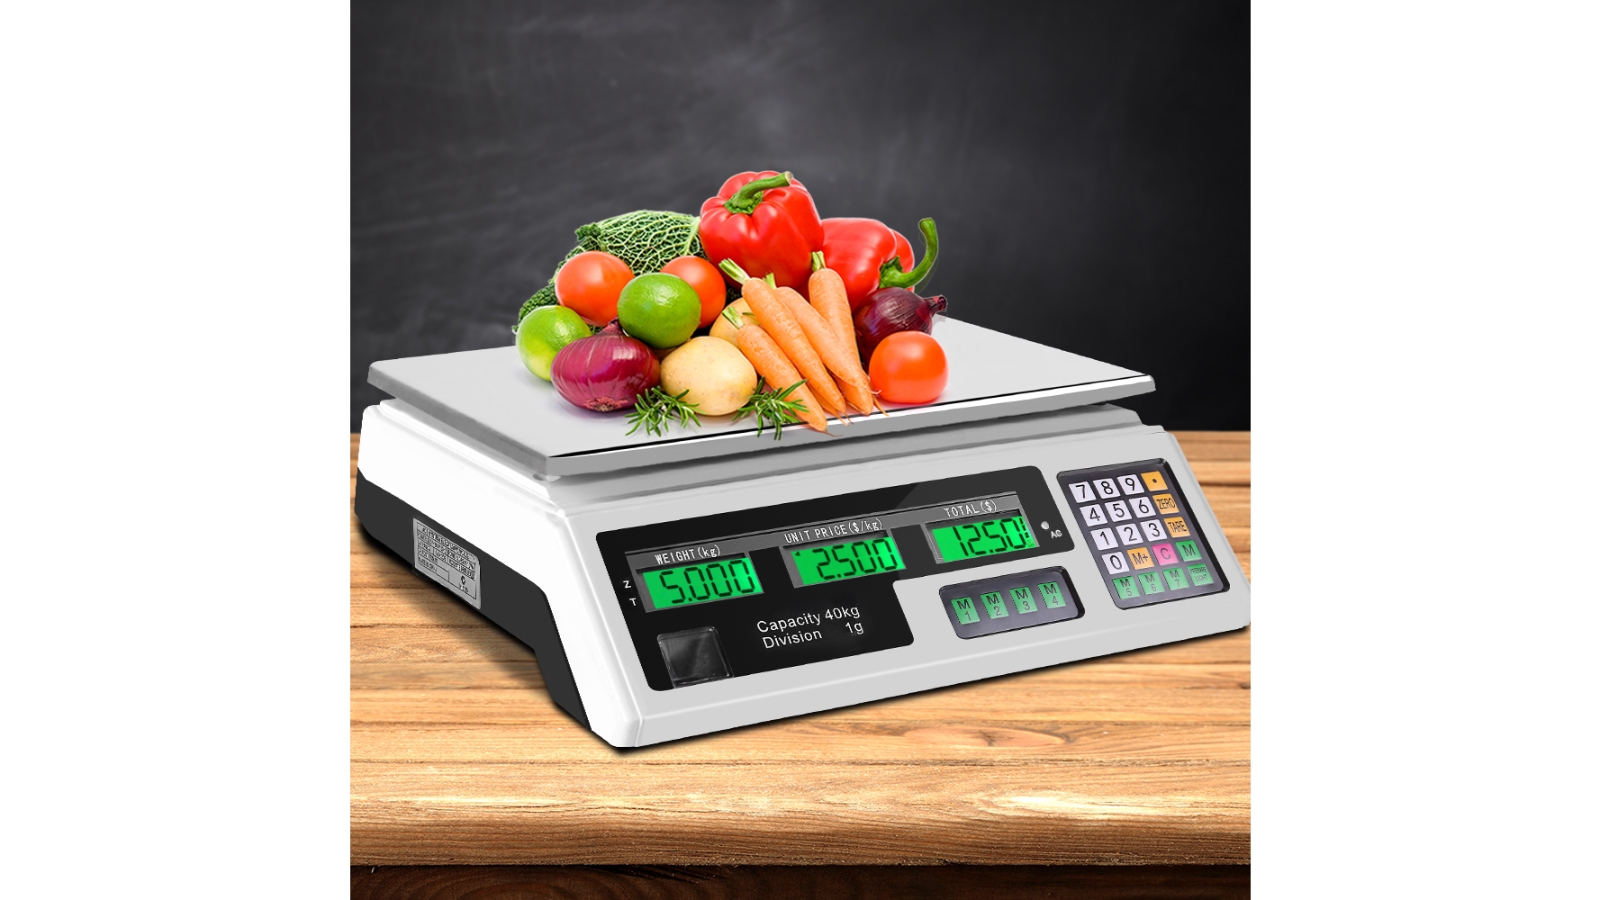 Commercial Digital Kitchen Scales Shop 40KG Food Weight Electronic Scale